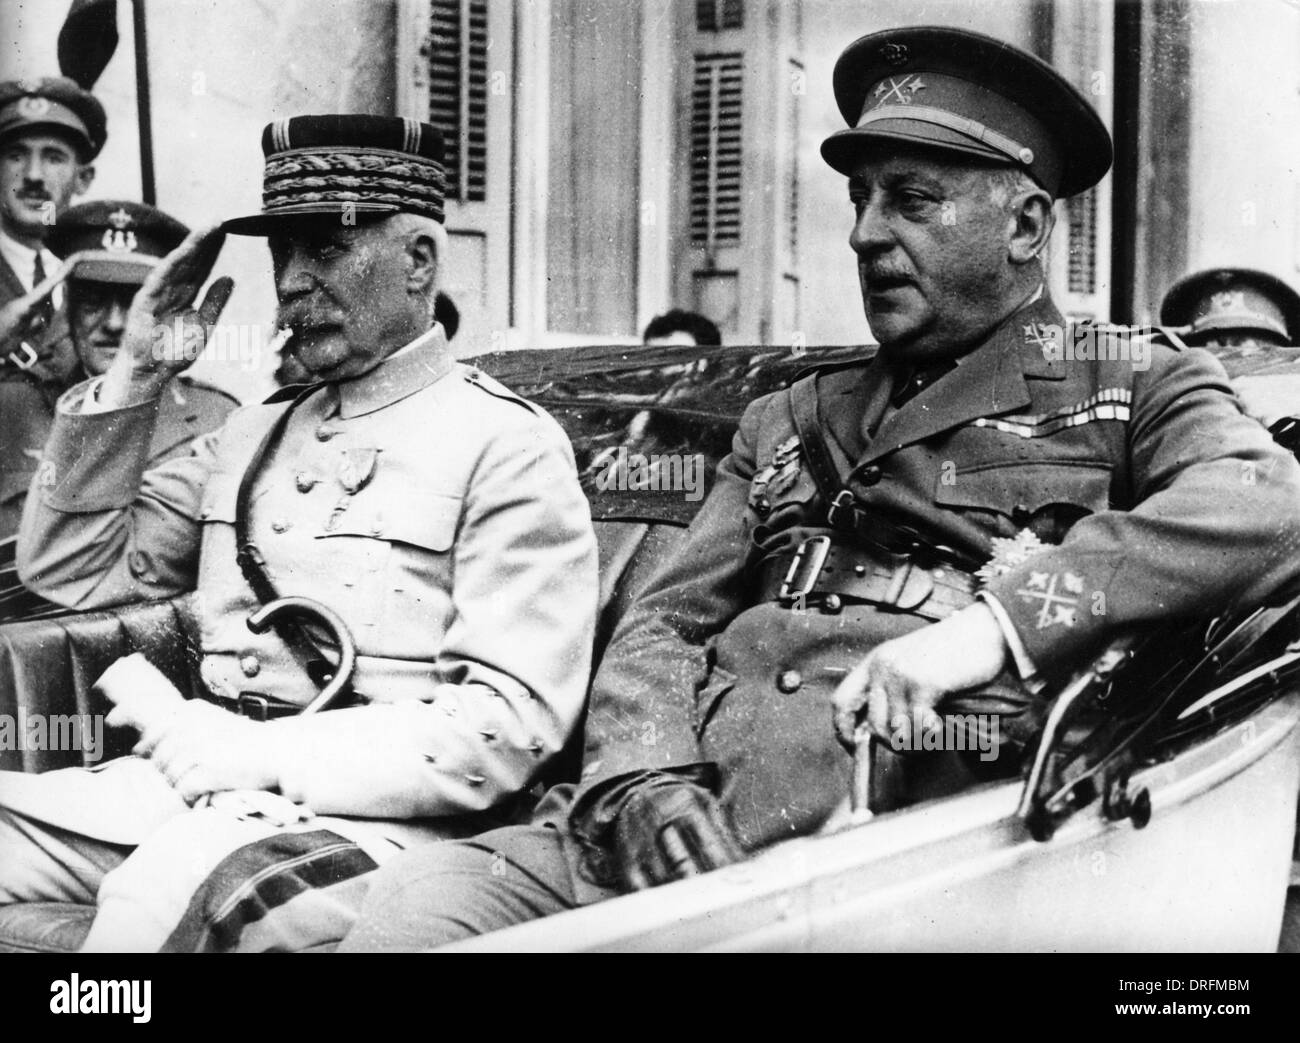 general-petain-french-army-officer-ww1-D